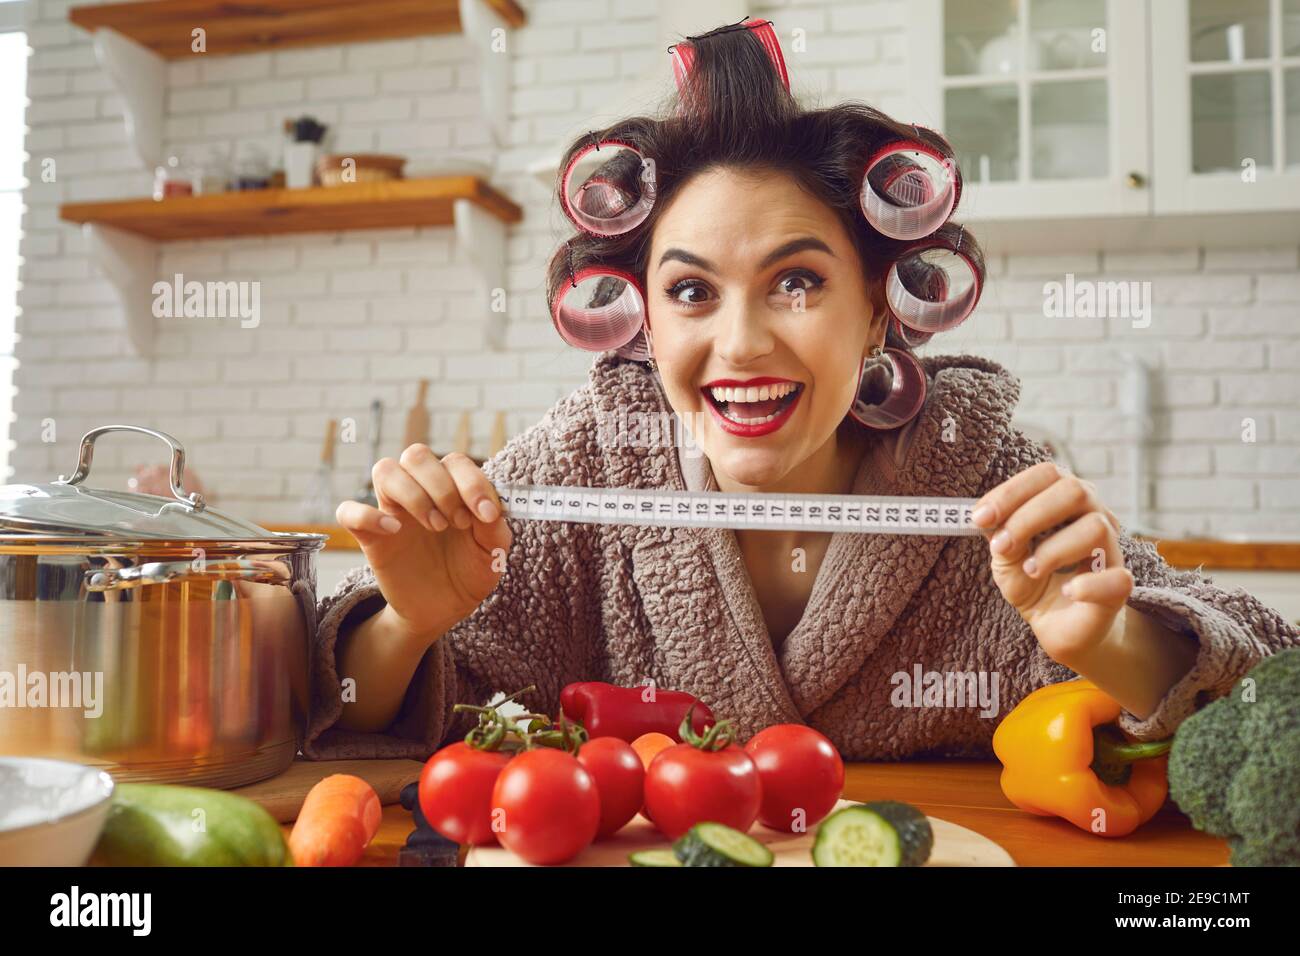 Funny housewife holding a tape measure and showing how much weight she has lost on a diet Stock Photo